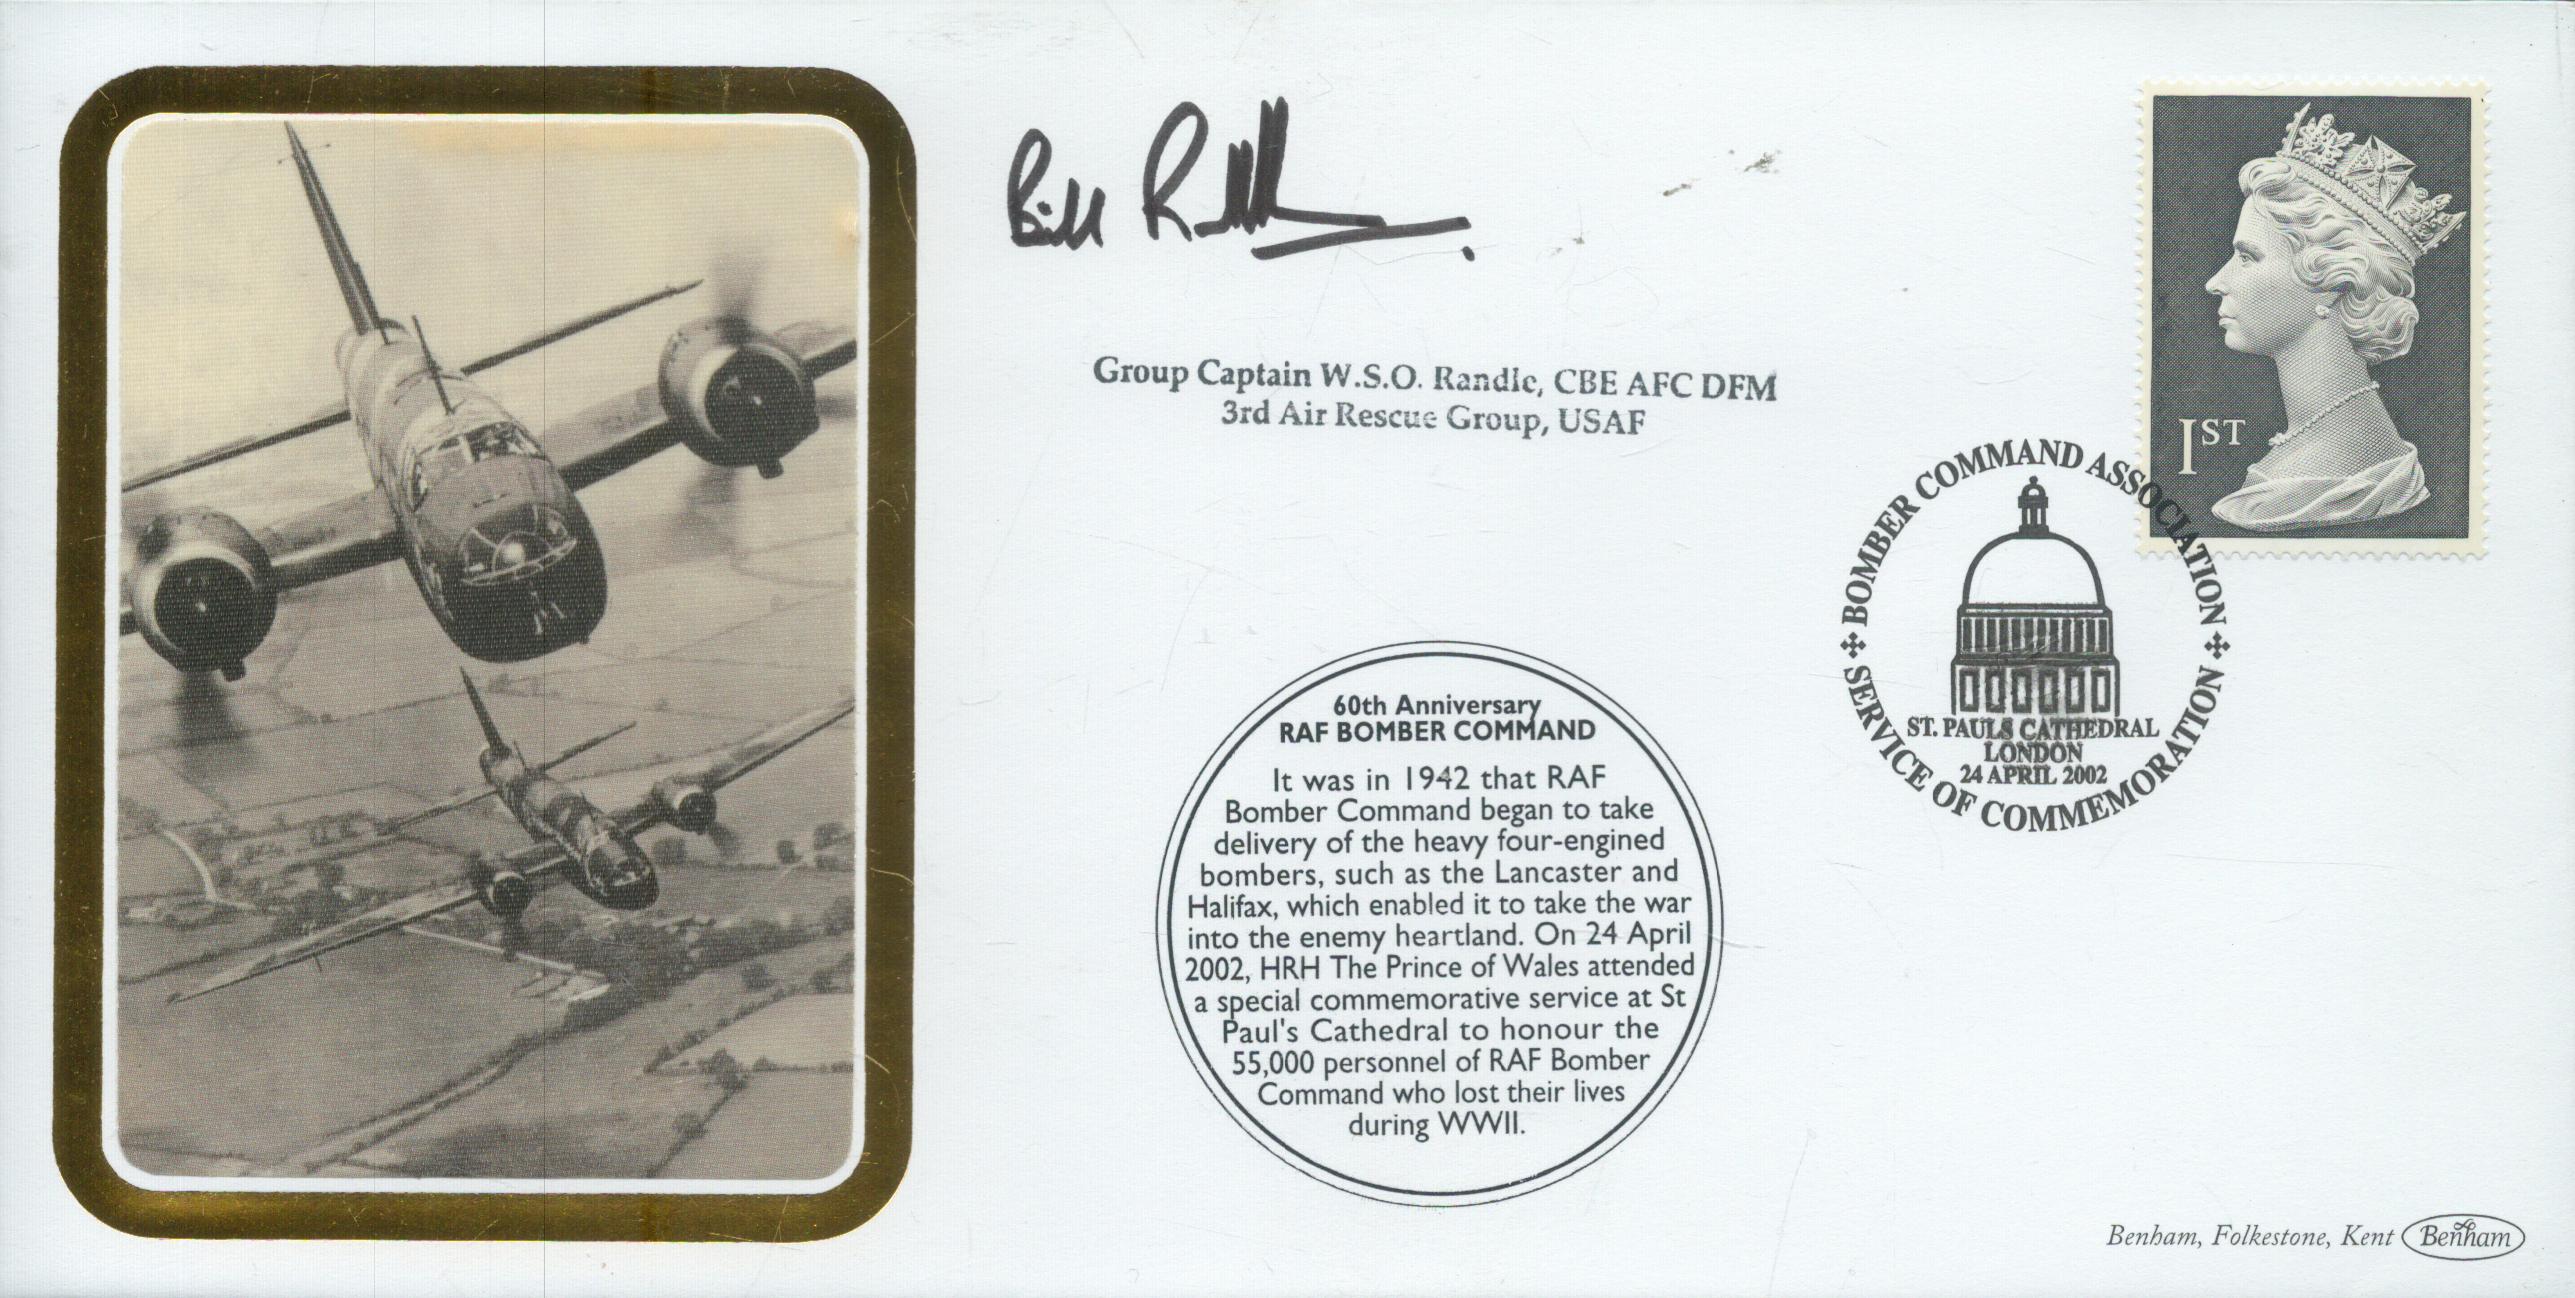 Gr Cpt Bill Randle CBE, AFC,DFM signed 60th Anniversary RAF Bomber Command FDC PM Bomber Command